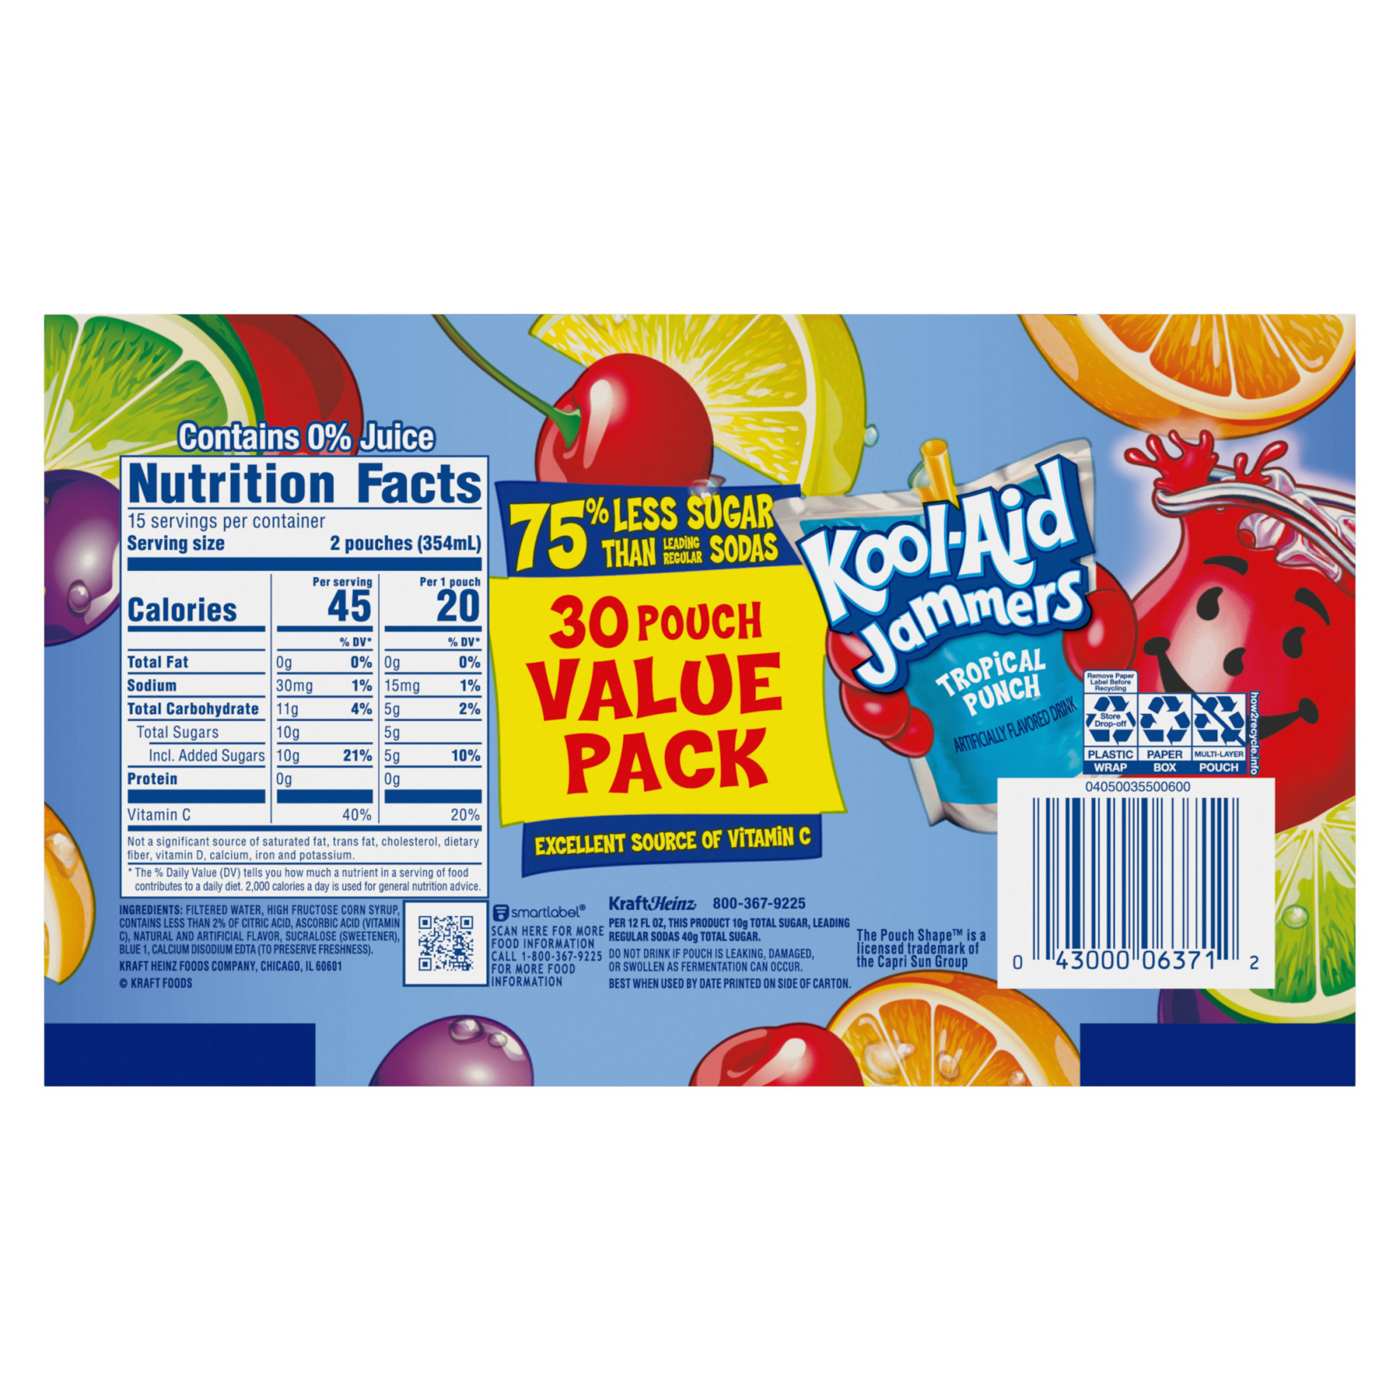 Kool-Aid Jammers Tropical Punch Value Pack; image 6 of 7